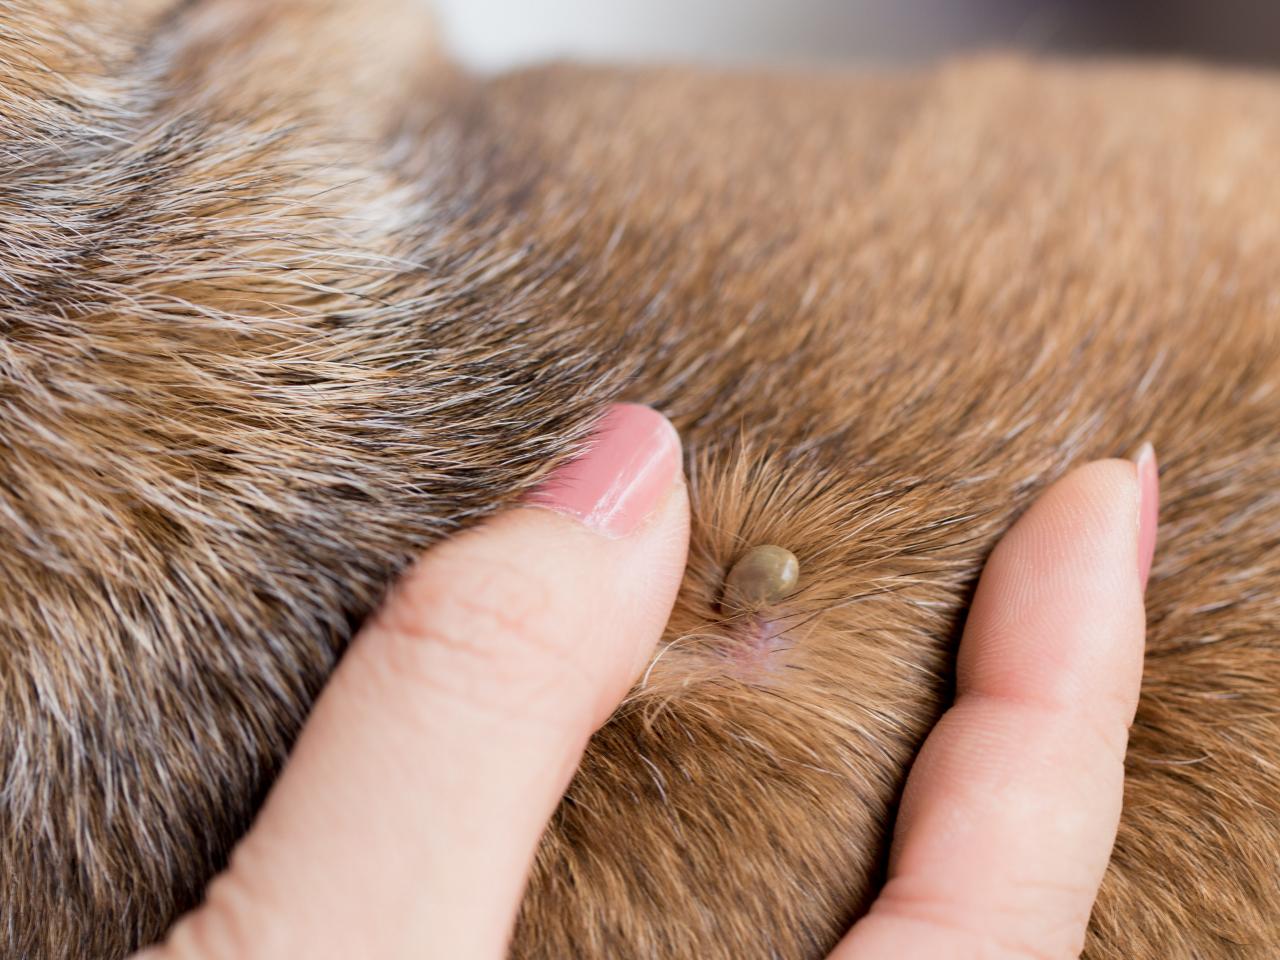 How Can You Tell A Tick From A Mole On A Dog